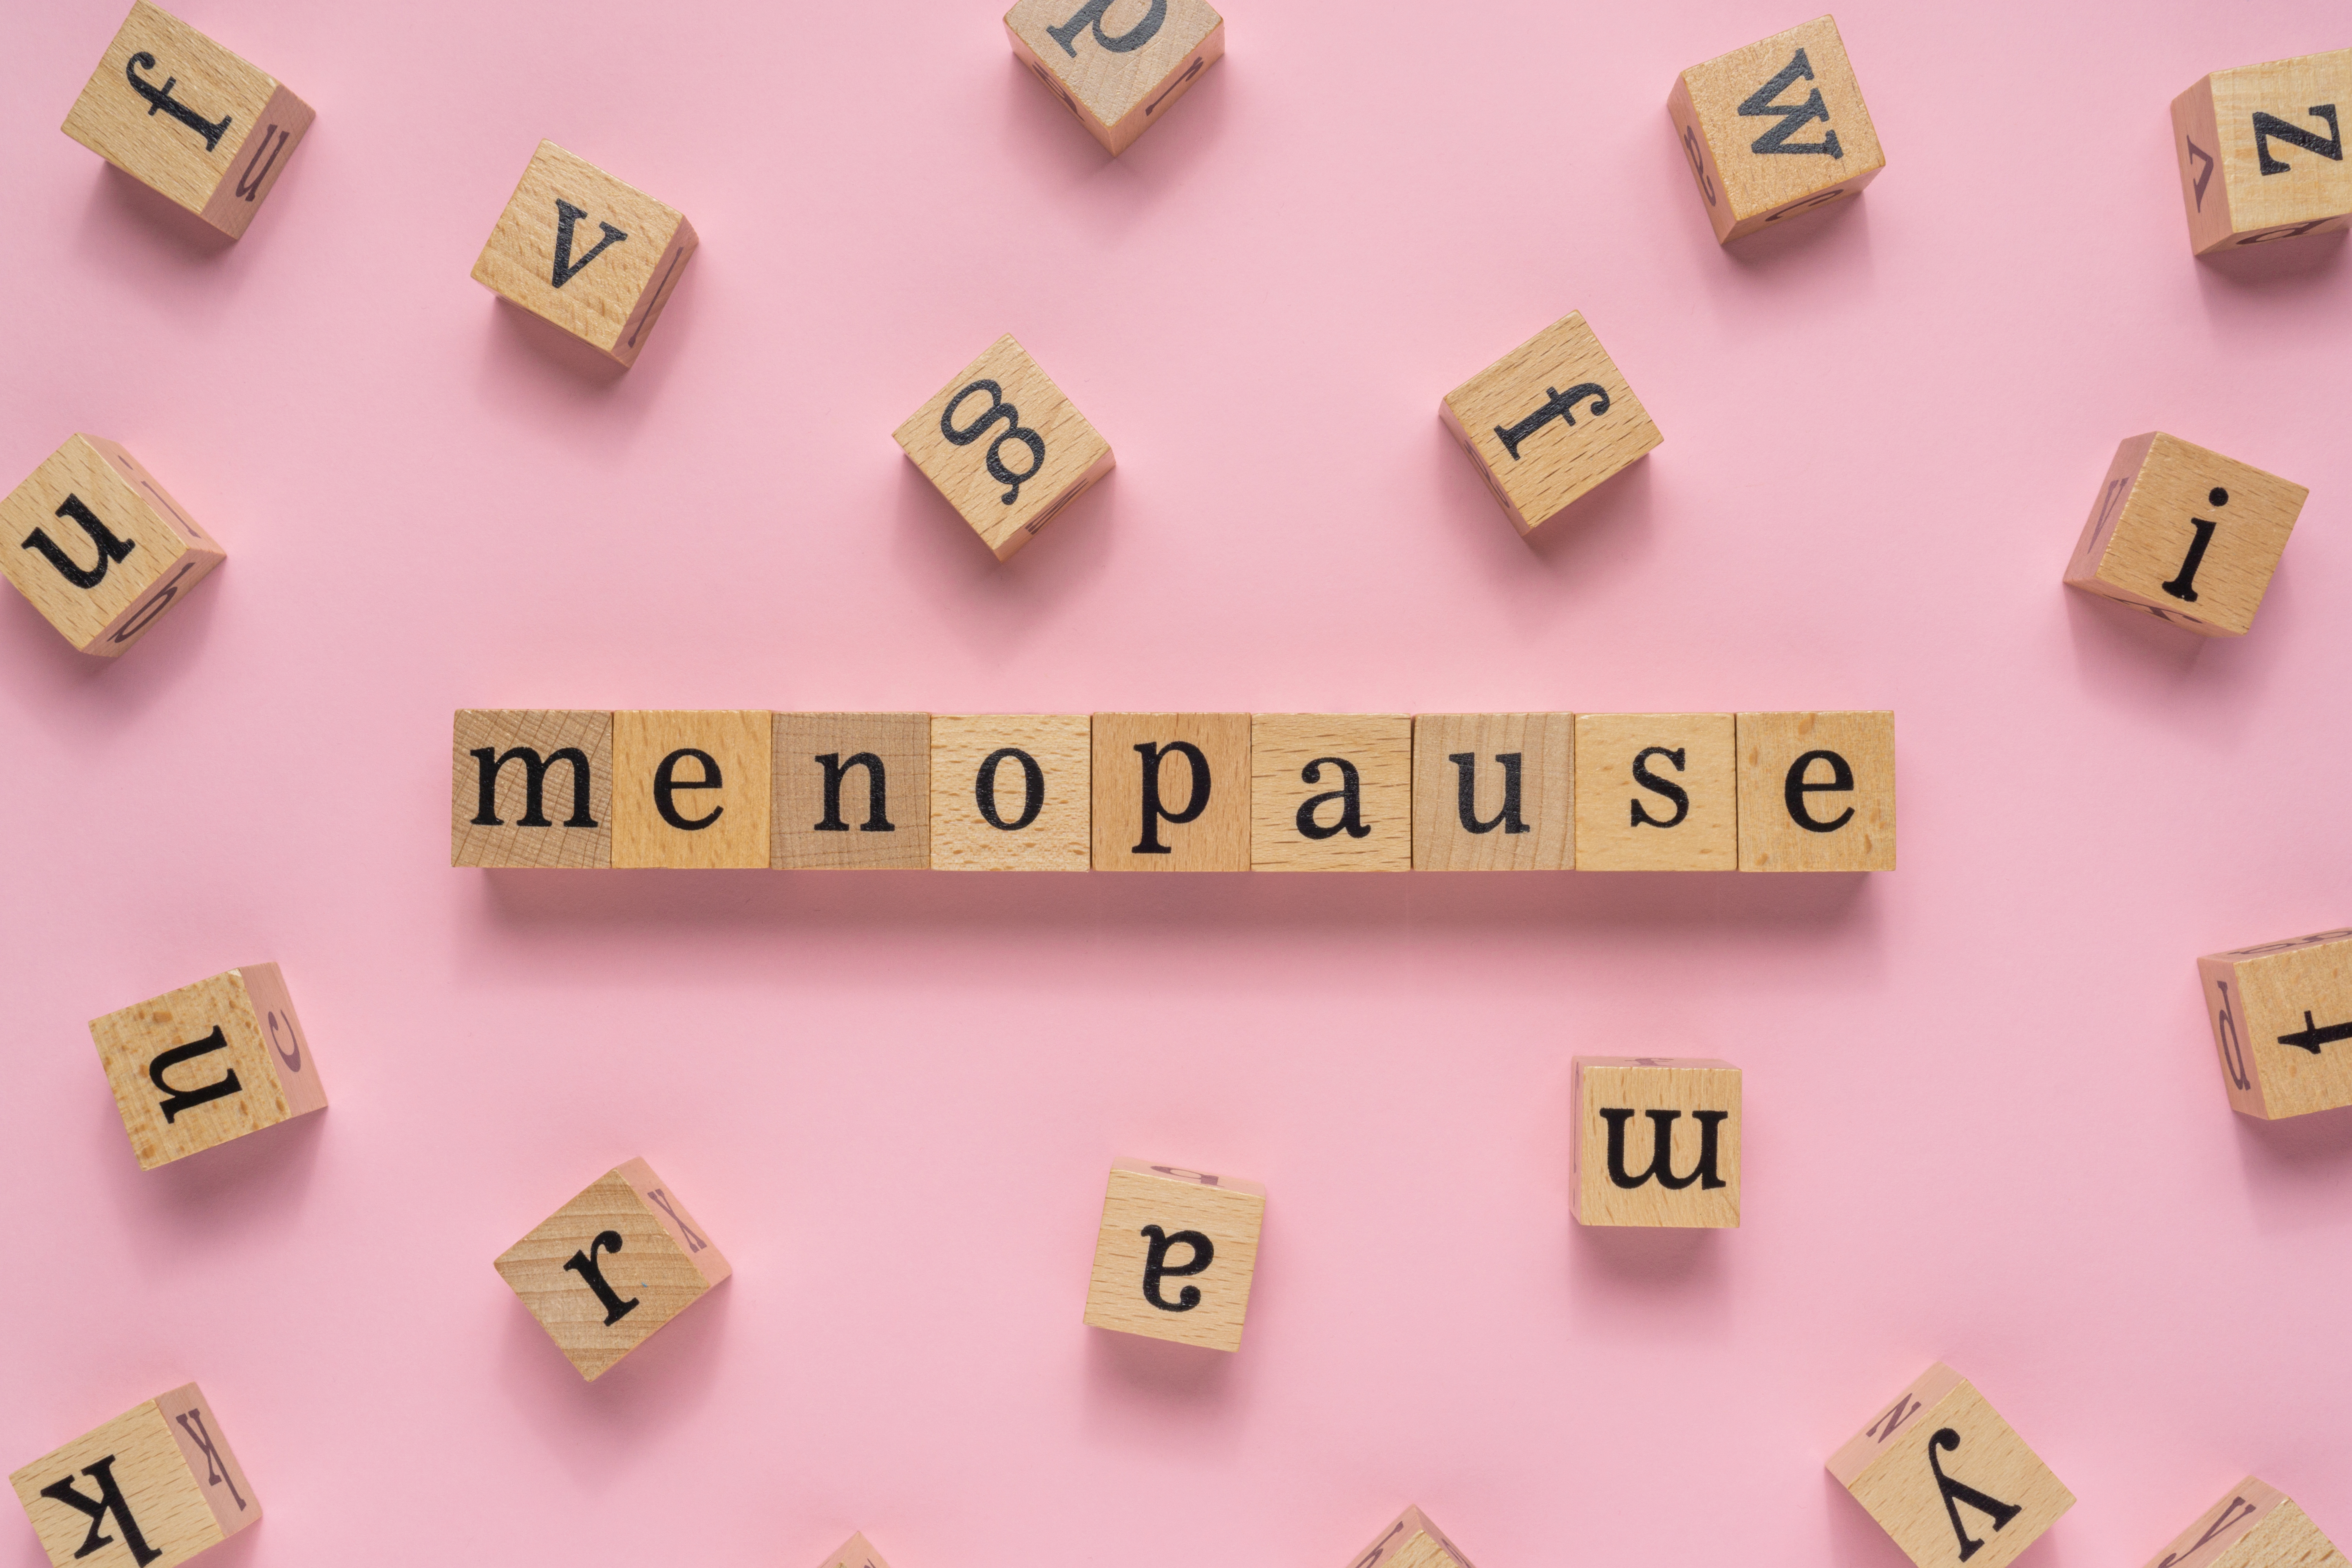 Questions about menopause? Here's what one gynecologist says you need to  know